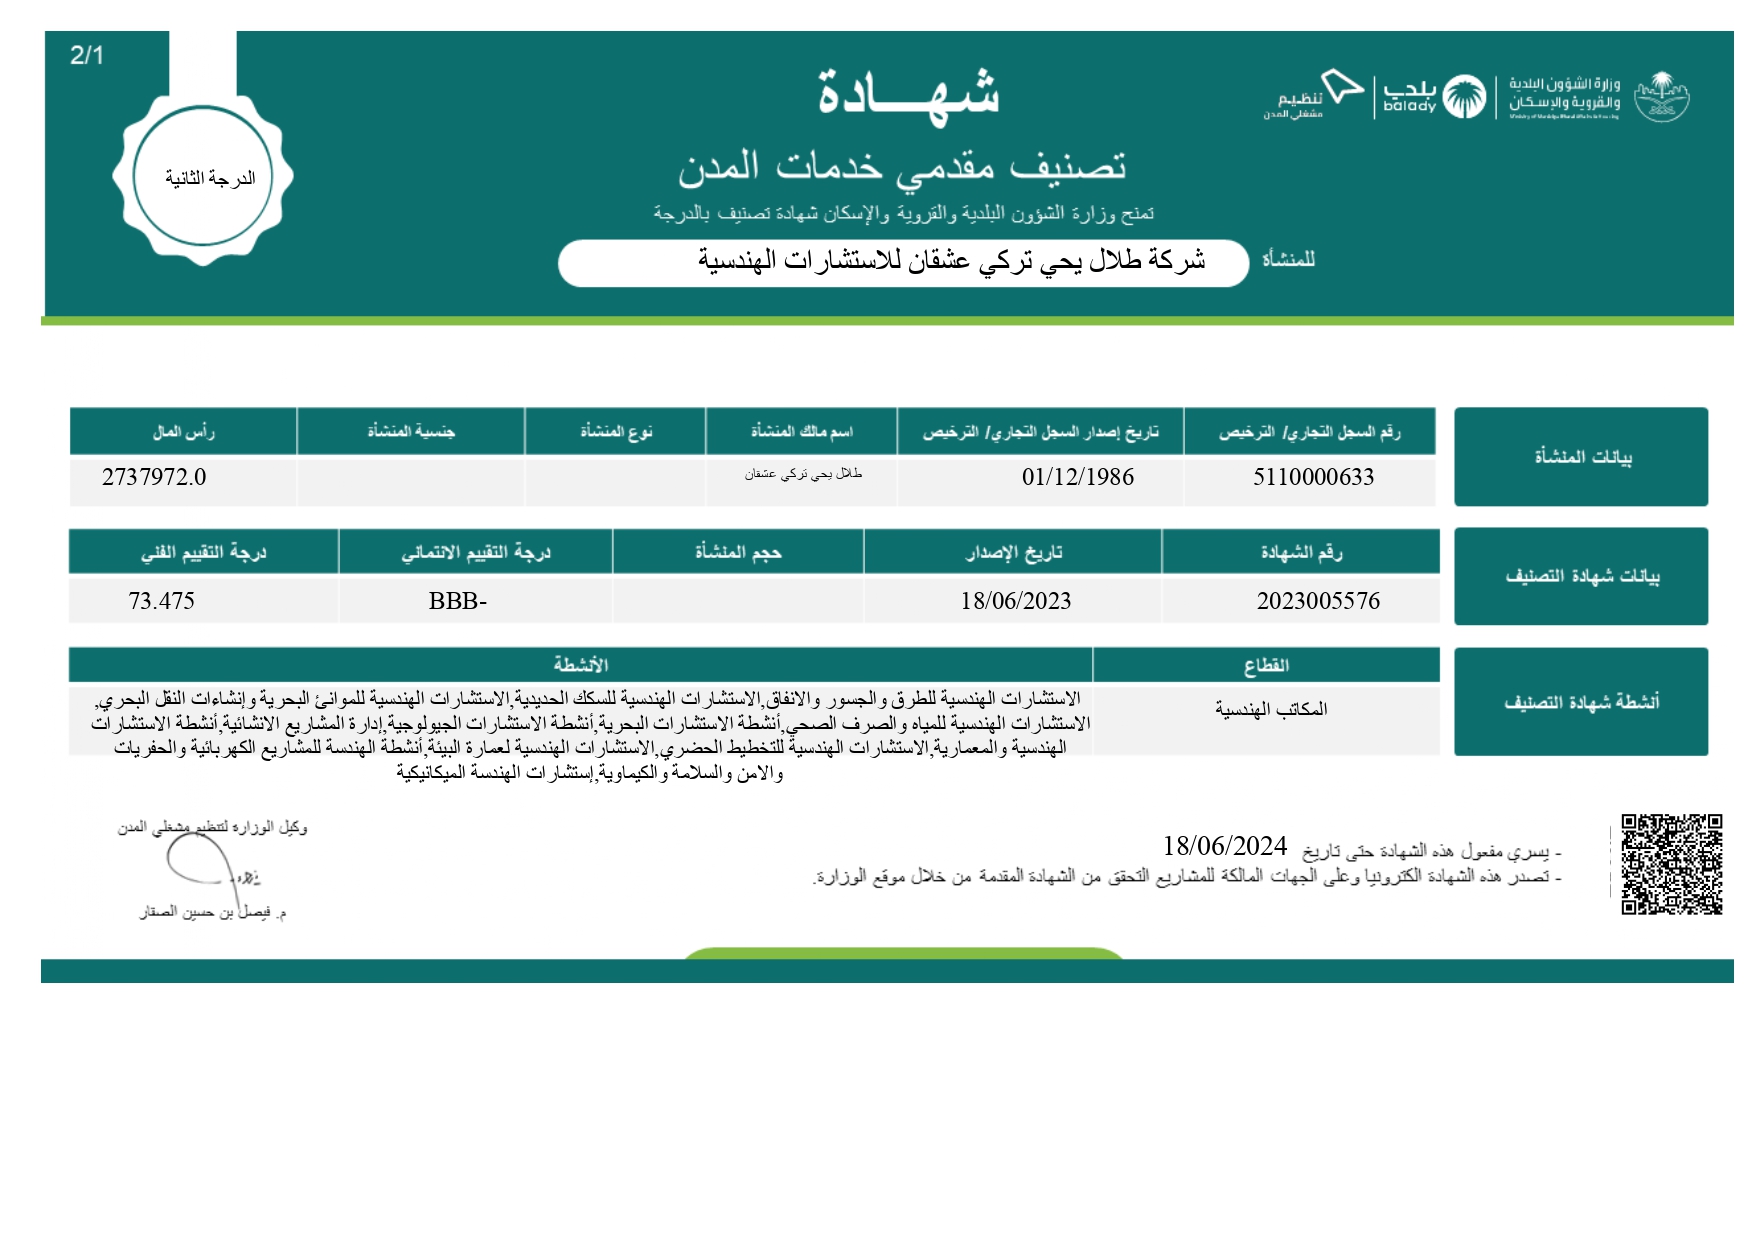 CERTIFICATION OF CITY SERVICE PROVIDERS FROM BALADI, Licenses and Qualifications